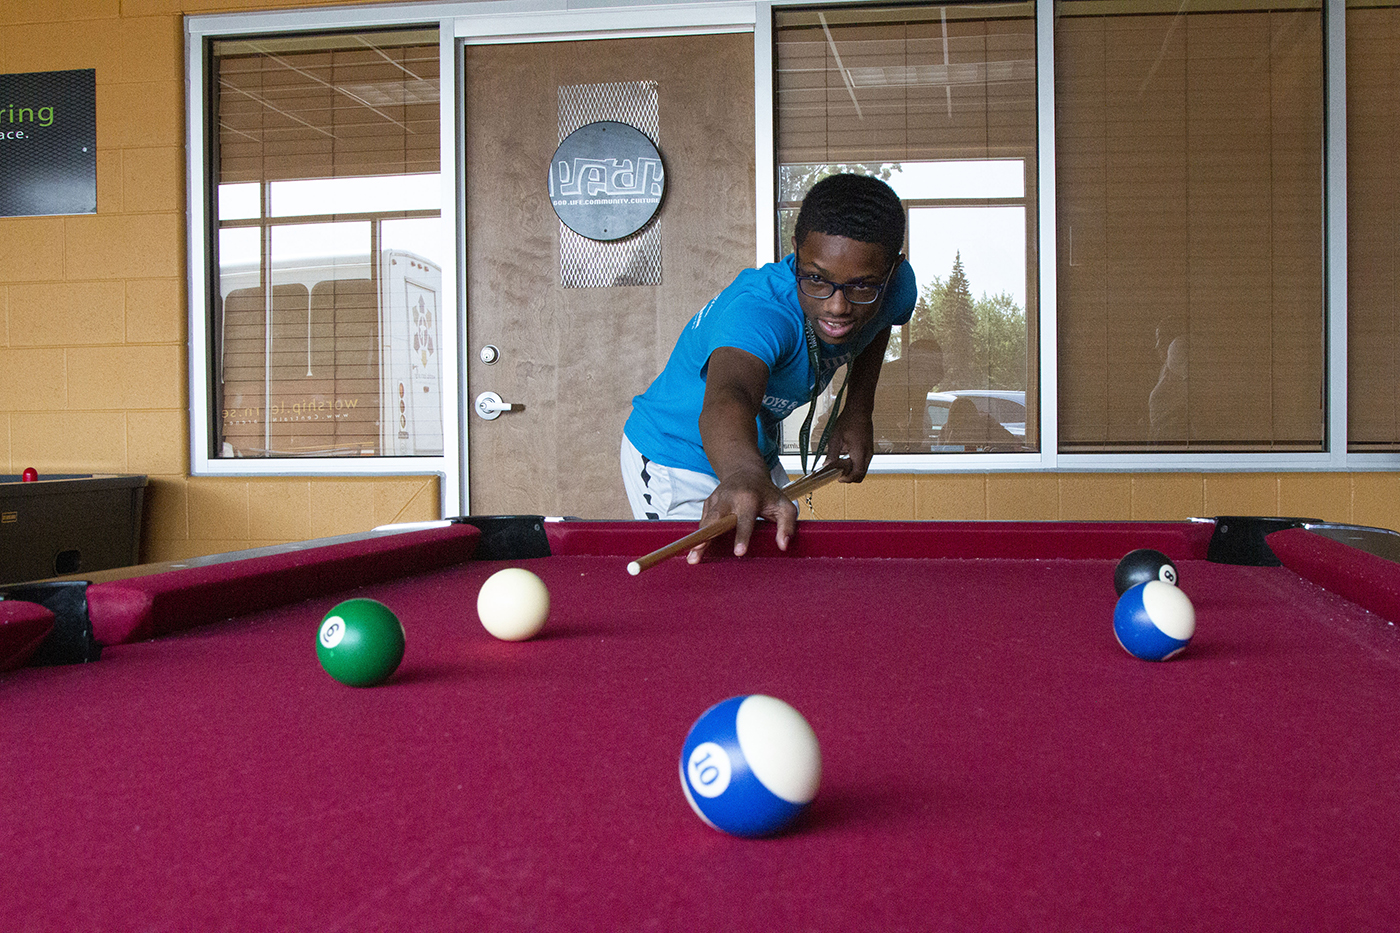 A young man leans across a billiards table with his stick as he is aiming to take a shot.